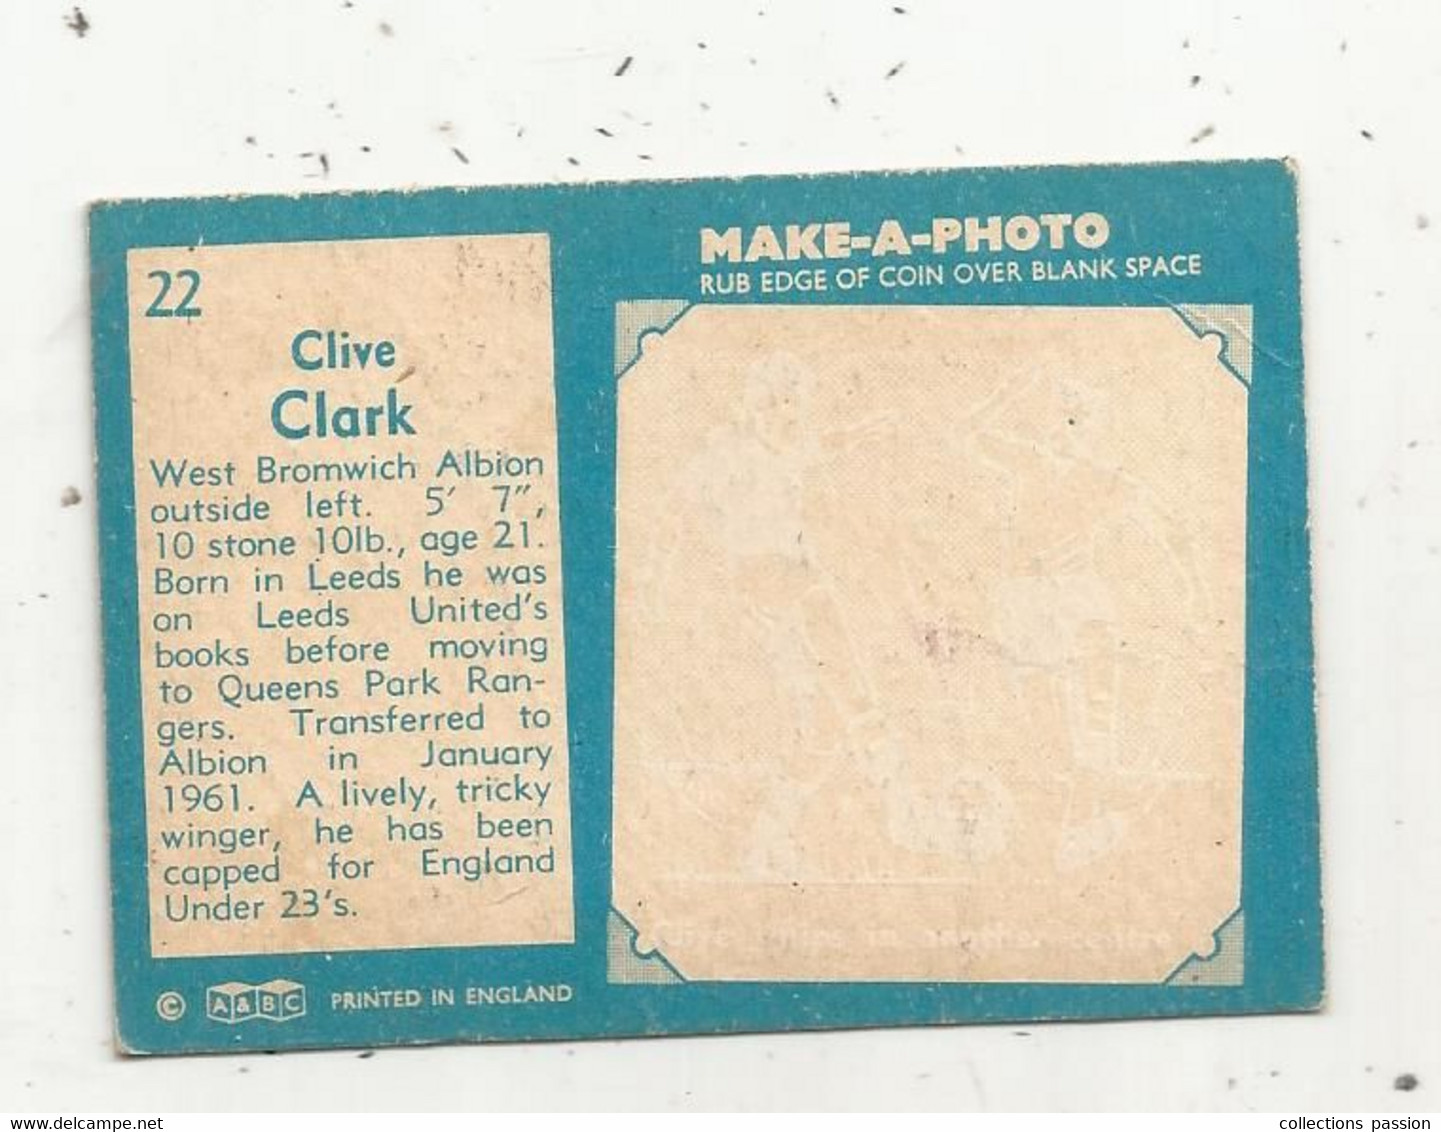 Trading Card , A&BC , England, Chewing Gum, Serie: Make A Photo , Année 60 , N° 22, CLIVE CLARK , West Bromwich Albion - Trading-Karten